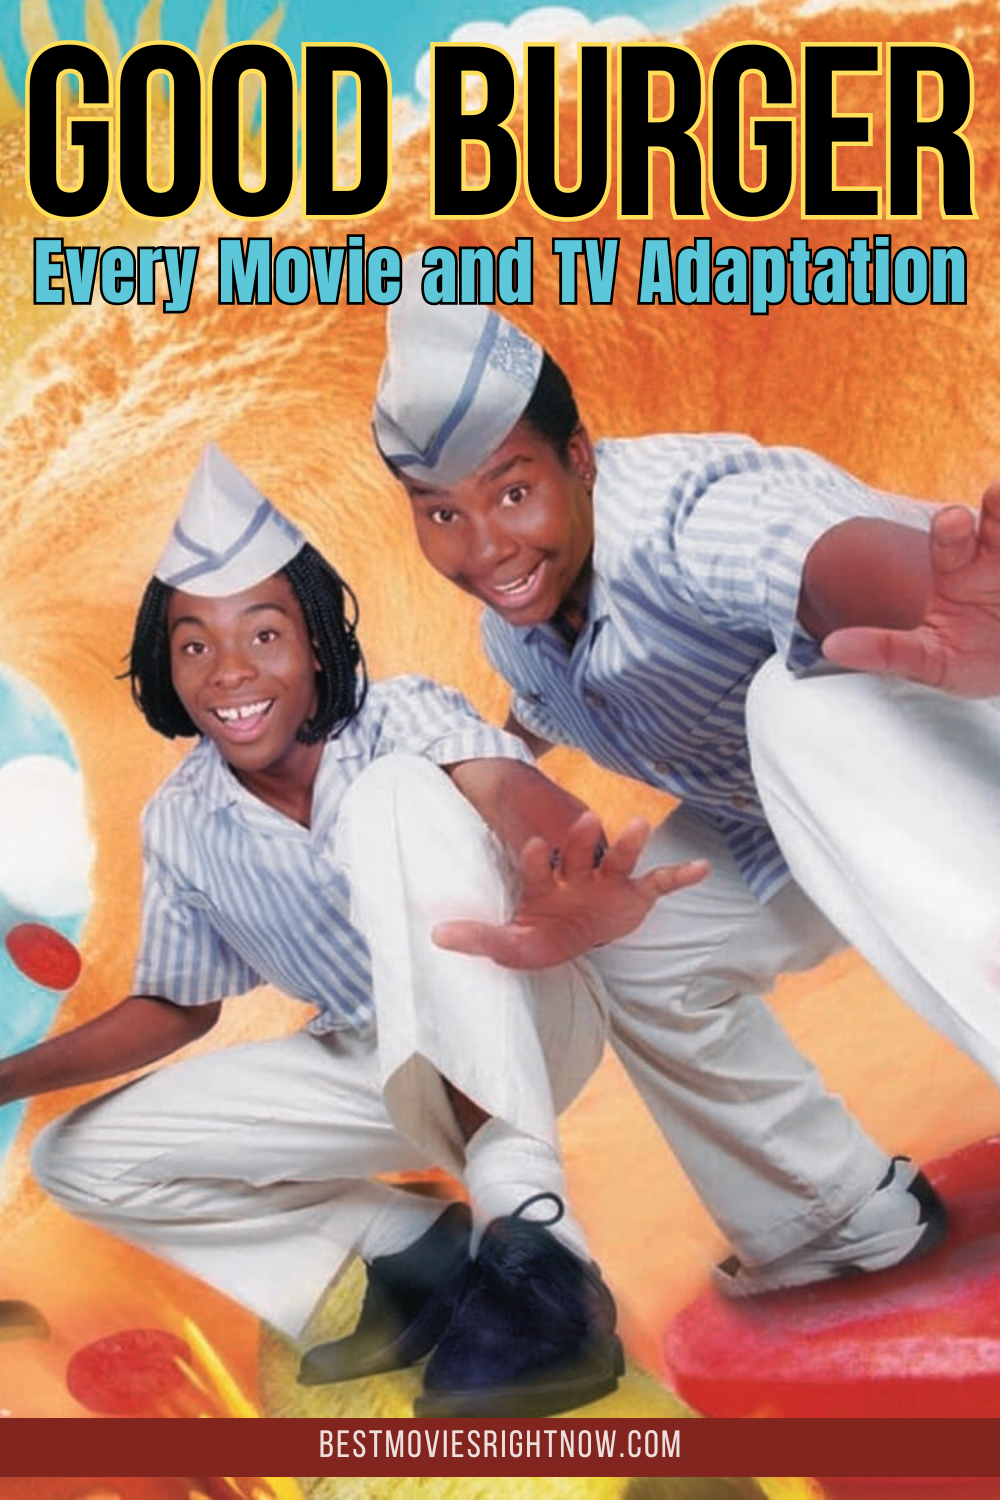 Good Burger movie image in pin size with text: 